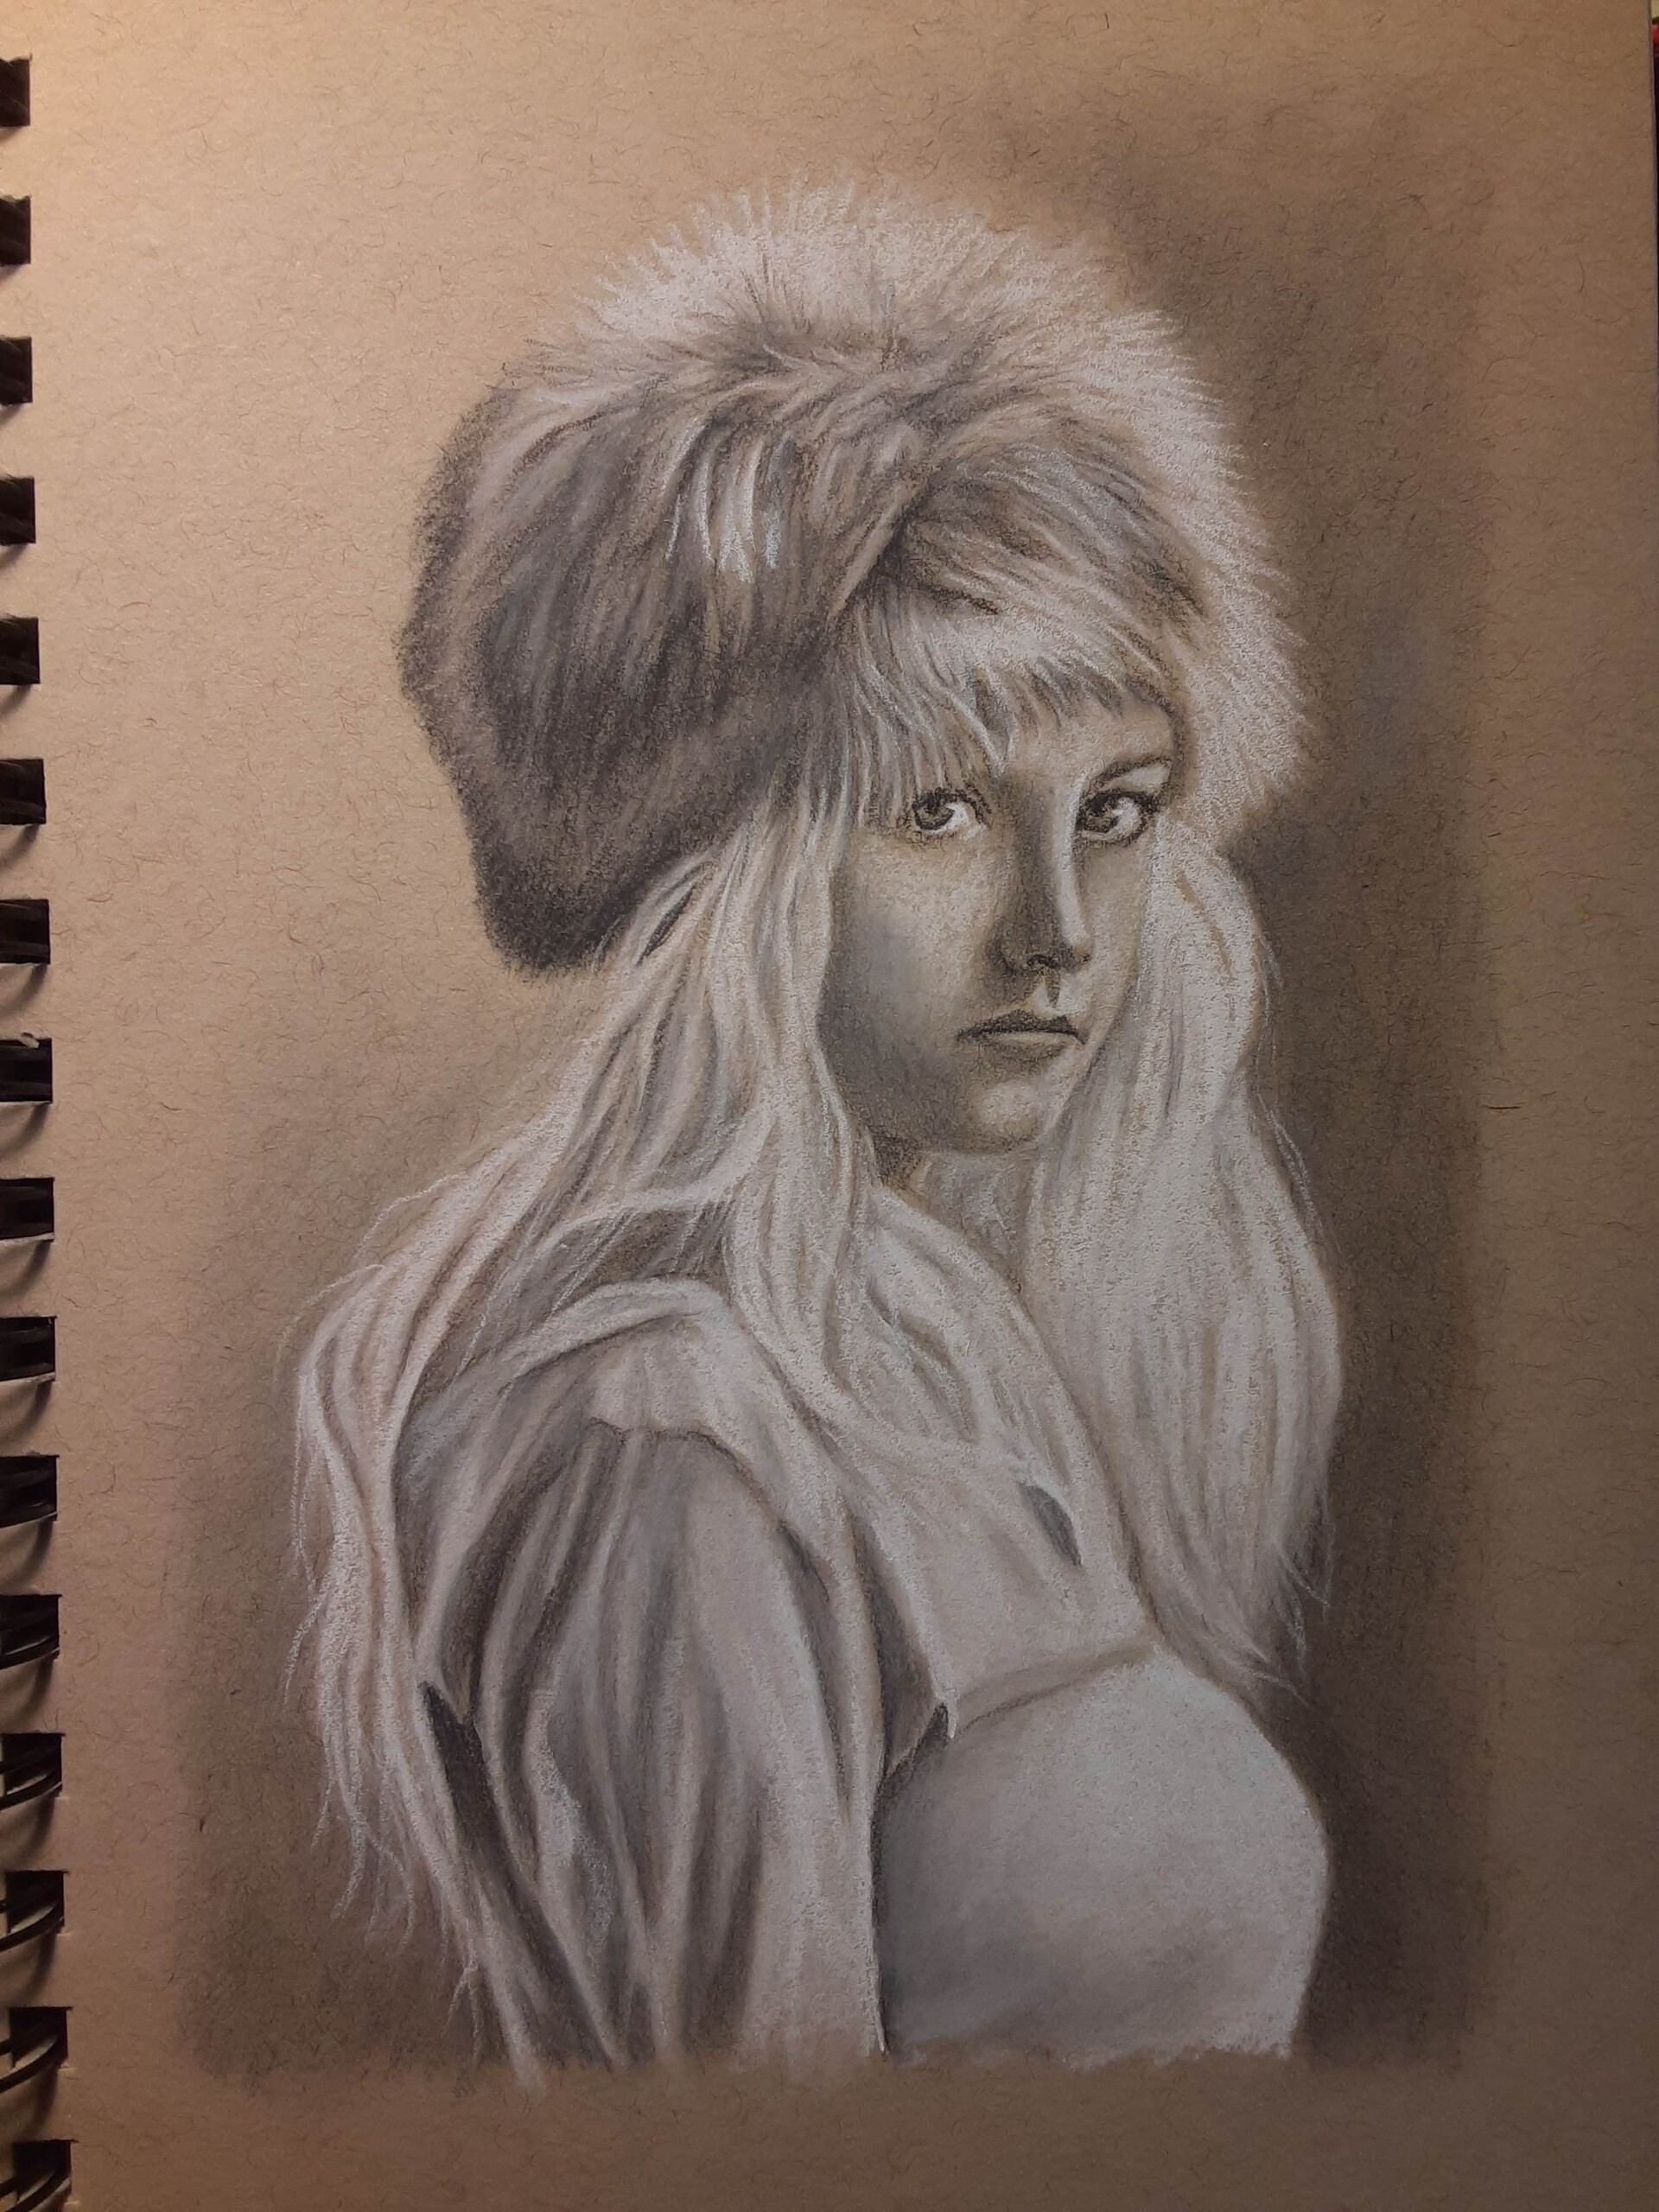 ArtStation - Charcoal and pastel sketch of a woman